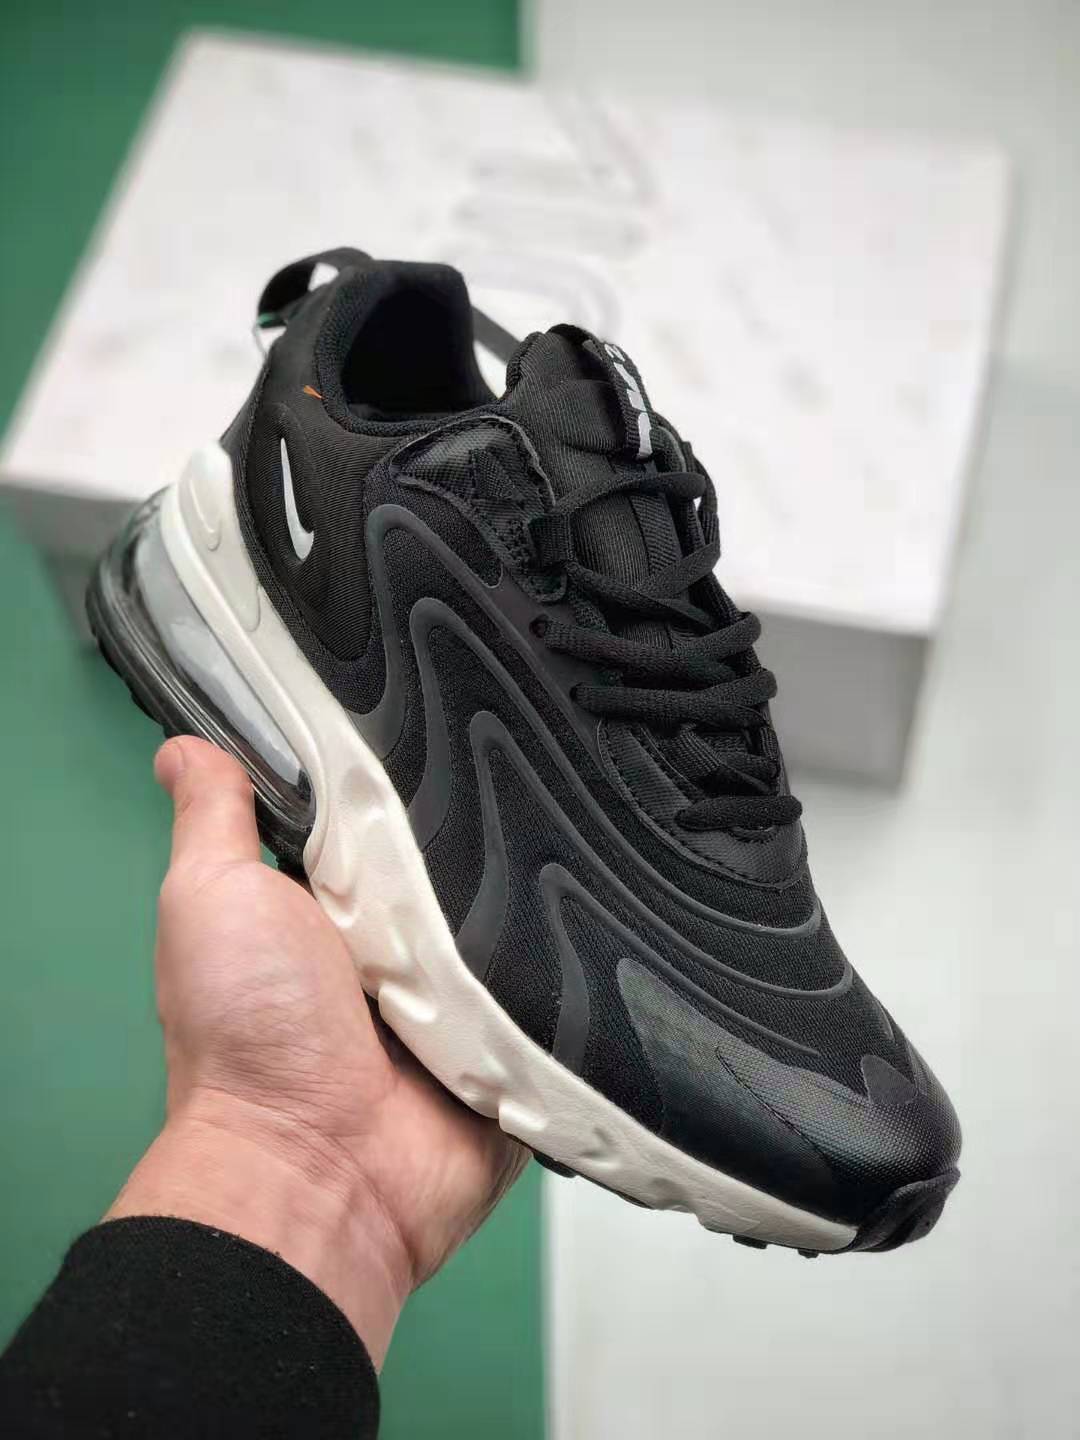 Nike Air Max 270 SE Black Grey White Running Shoes CD6870-406: Stylish and Comfortable Footwear for Active Individuals